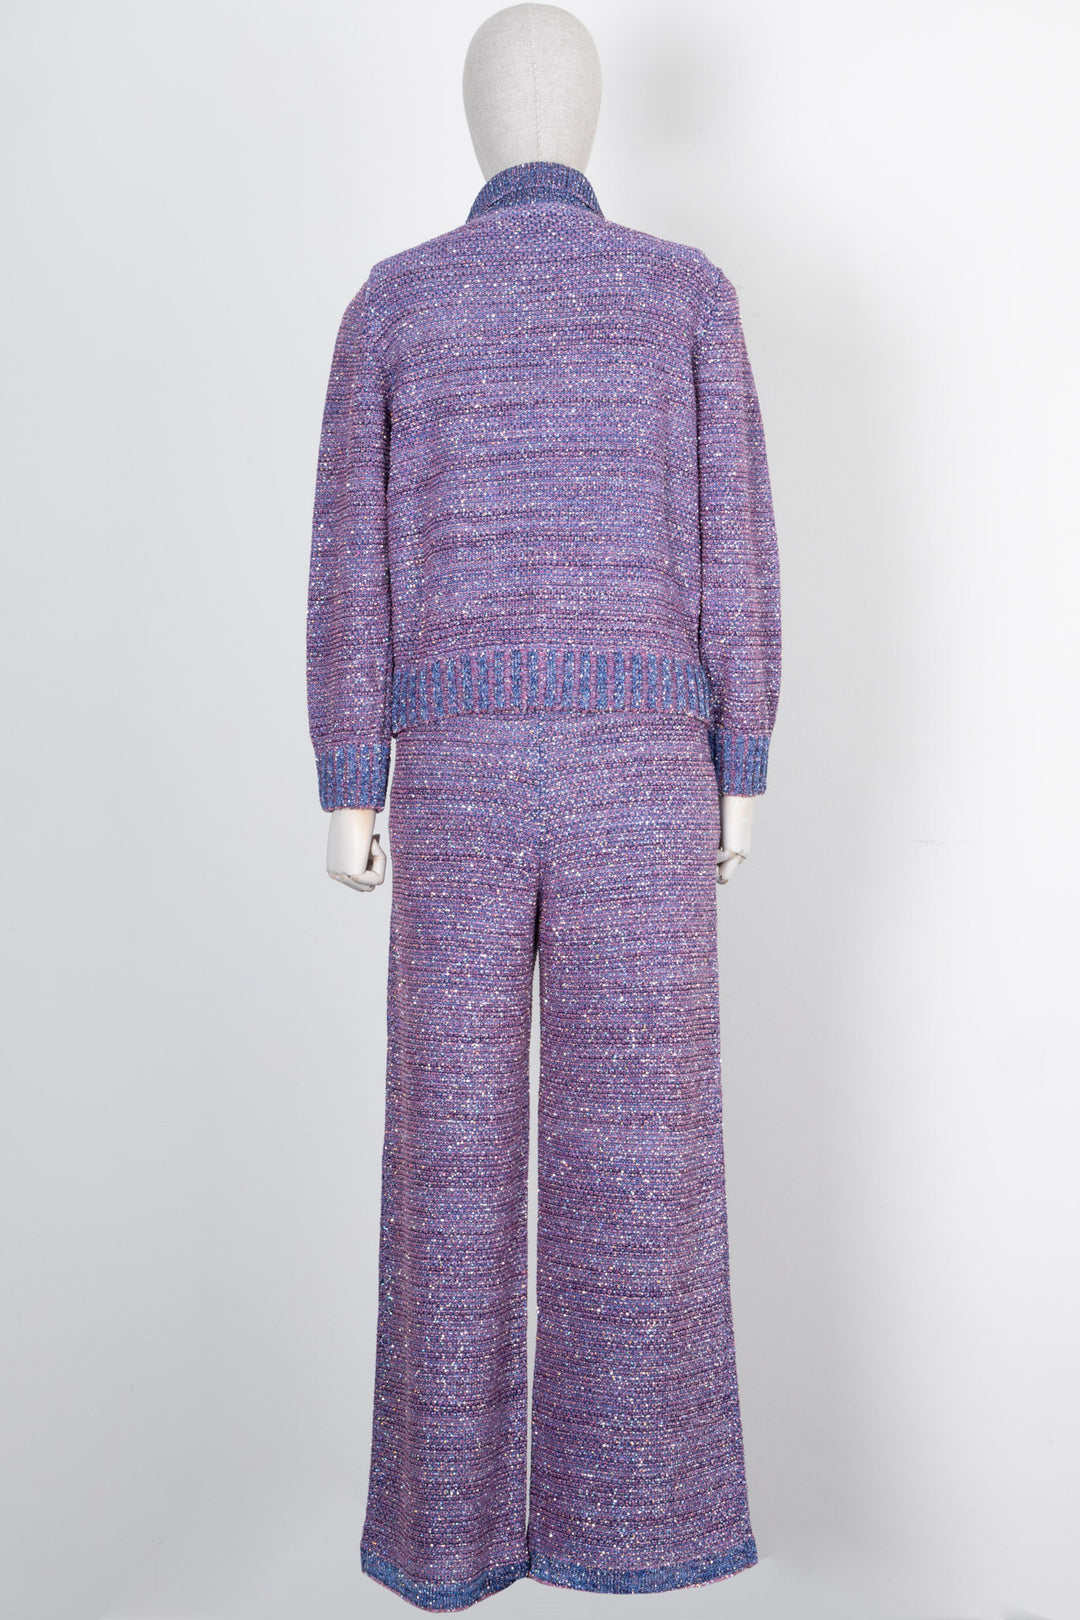 CHANEL Knit Two Piece Sequins Pink Blue